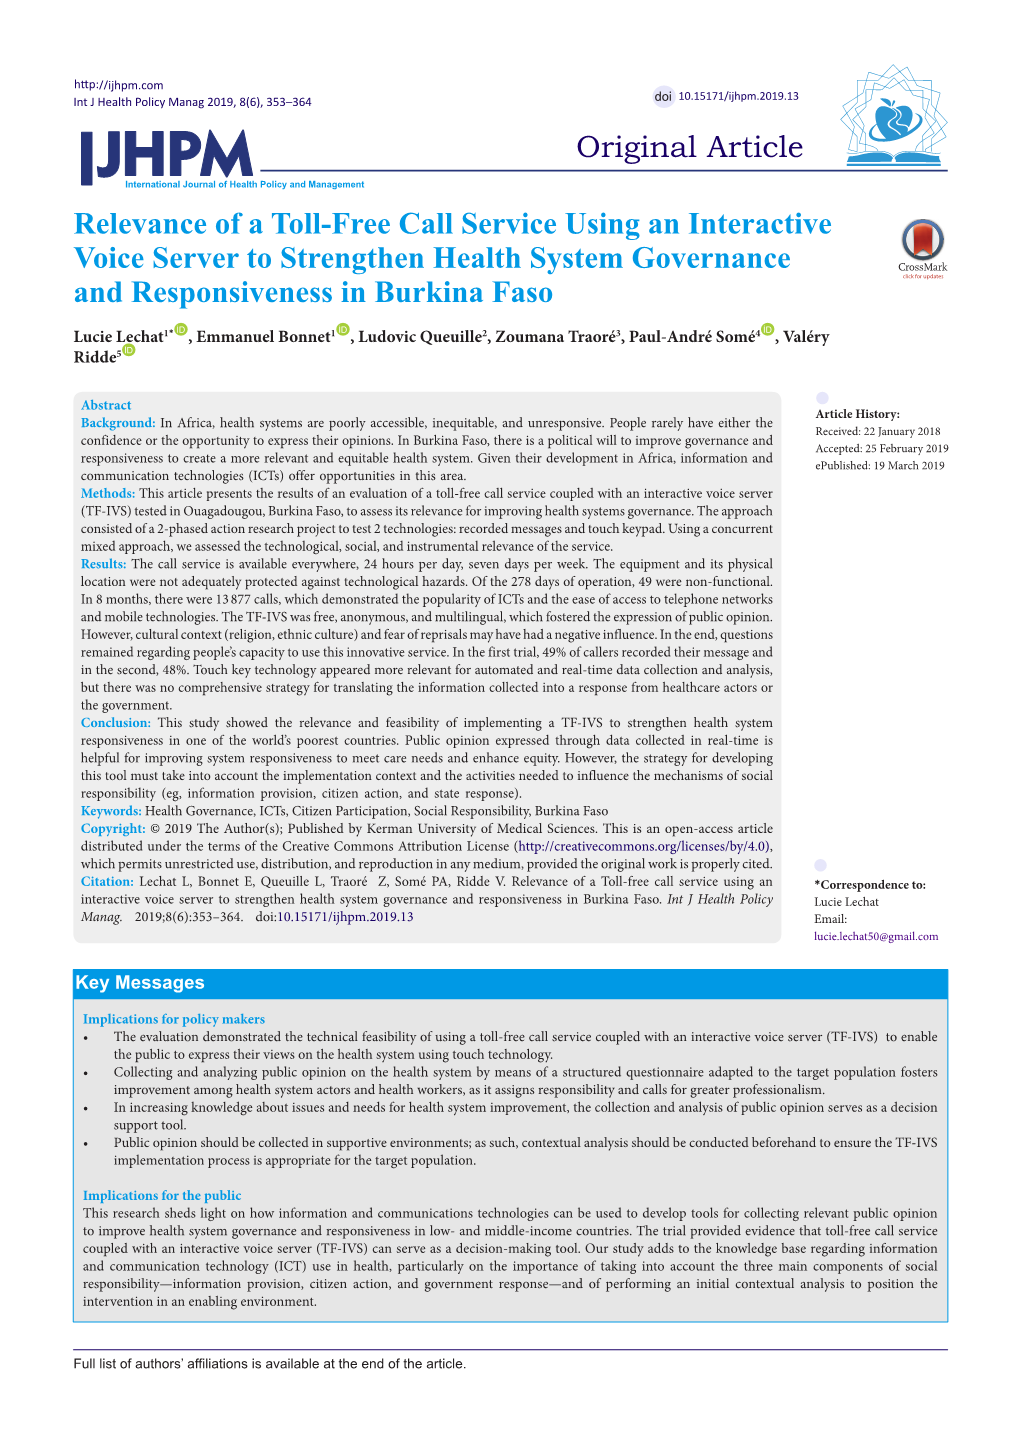 Relevance of a Toll-Free Call Service Using an Interactive Voice Server to Strengthen Health System Governance and Responsiveness in Burkina Faso